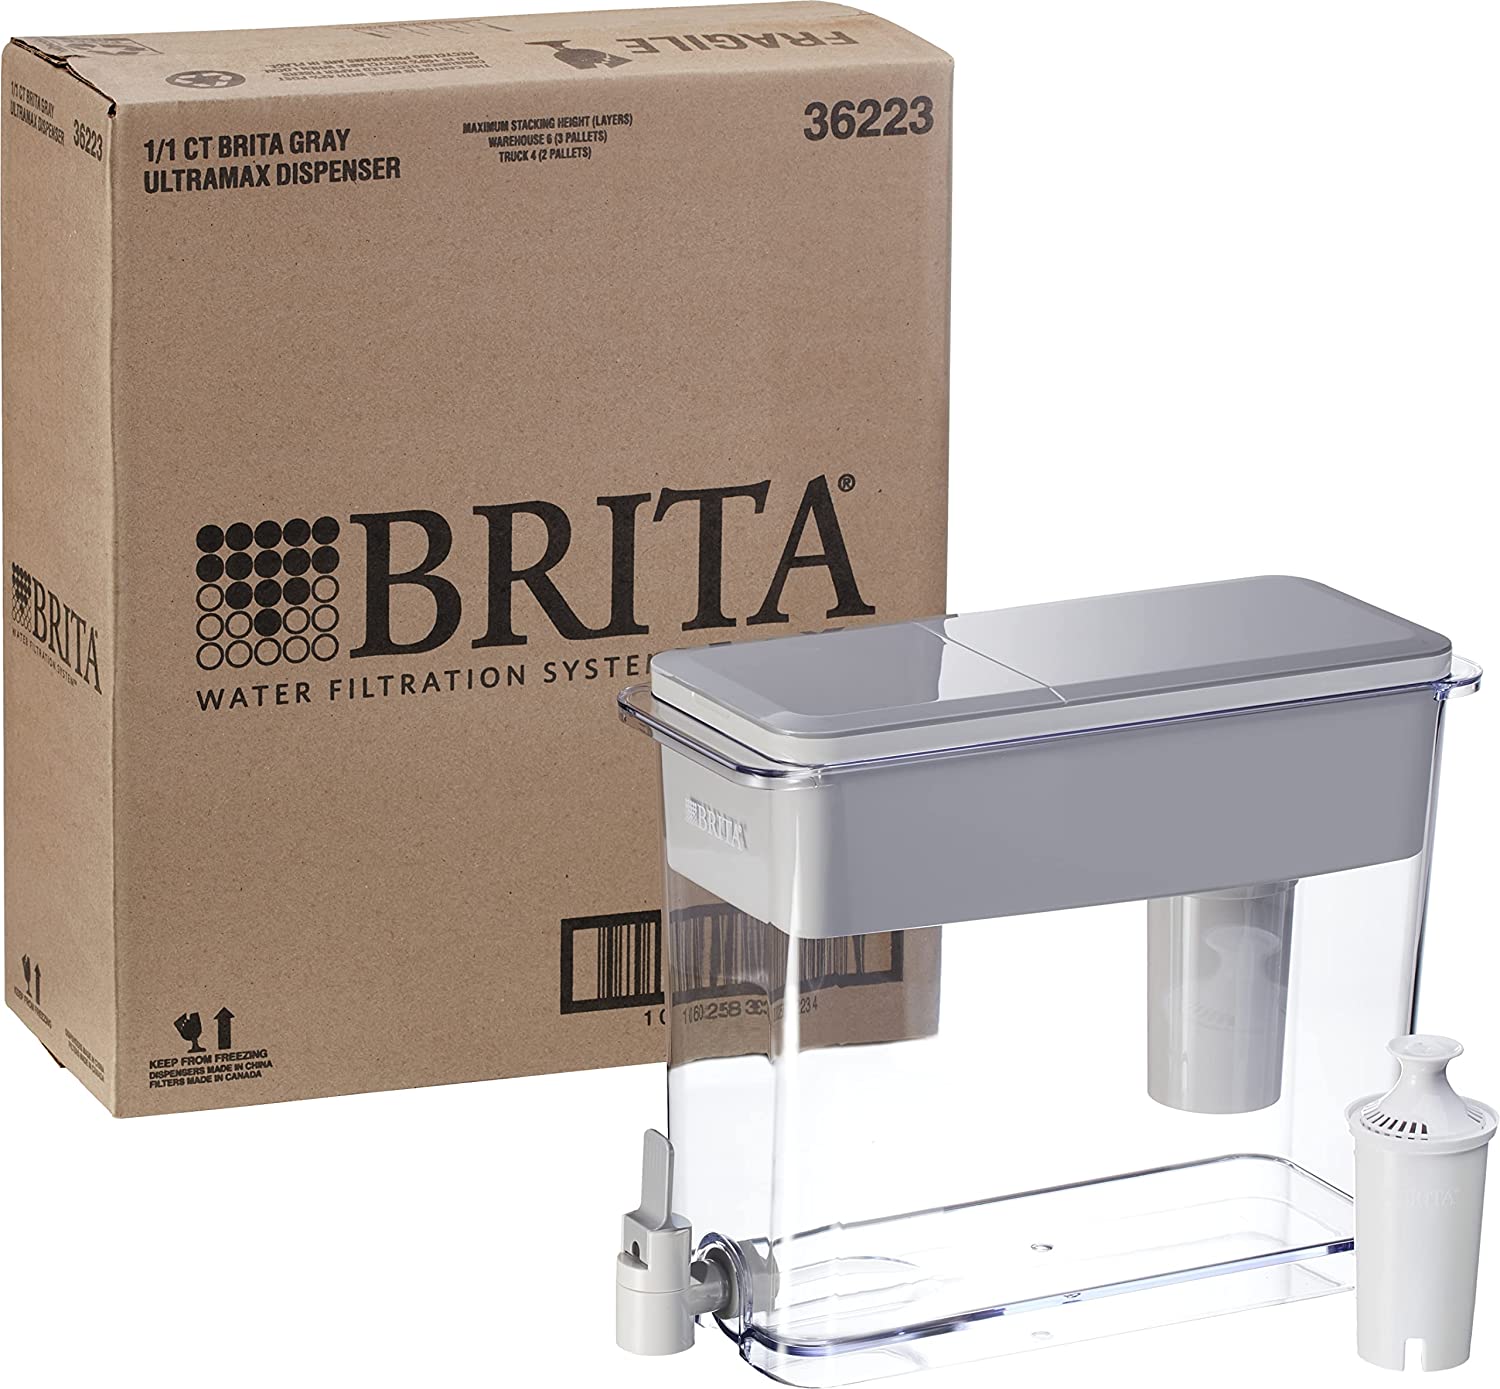 B R I T A Extra Large 18 Cup Filtered Water Dispenser with 1 Standard Filter, Made without BPA, UltraMax, Gray